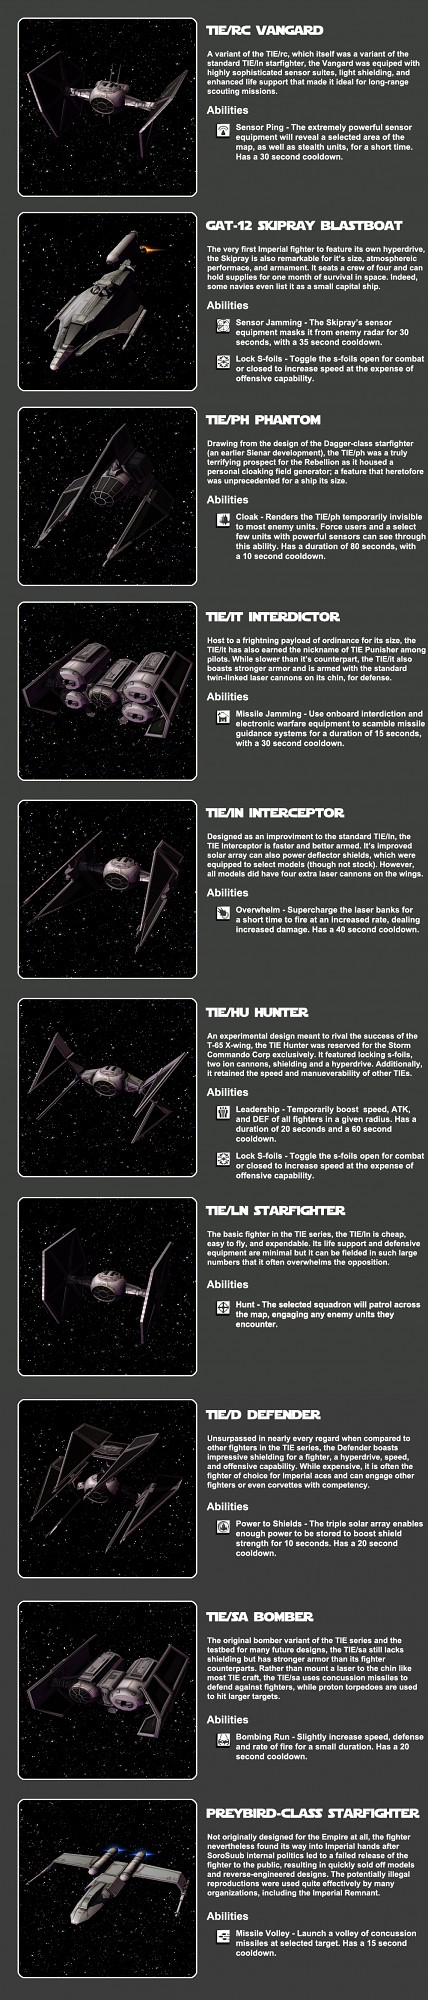 Imperial Remnant Fighters - An Overview